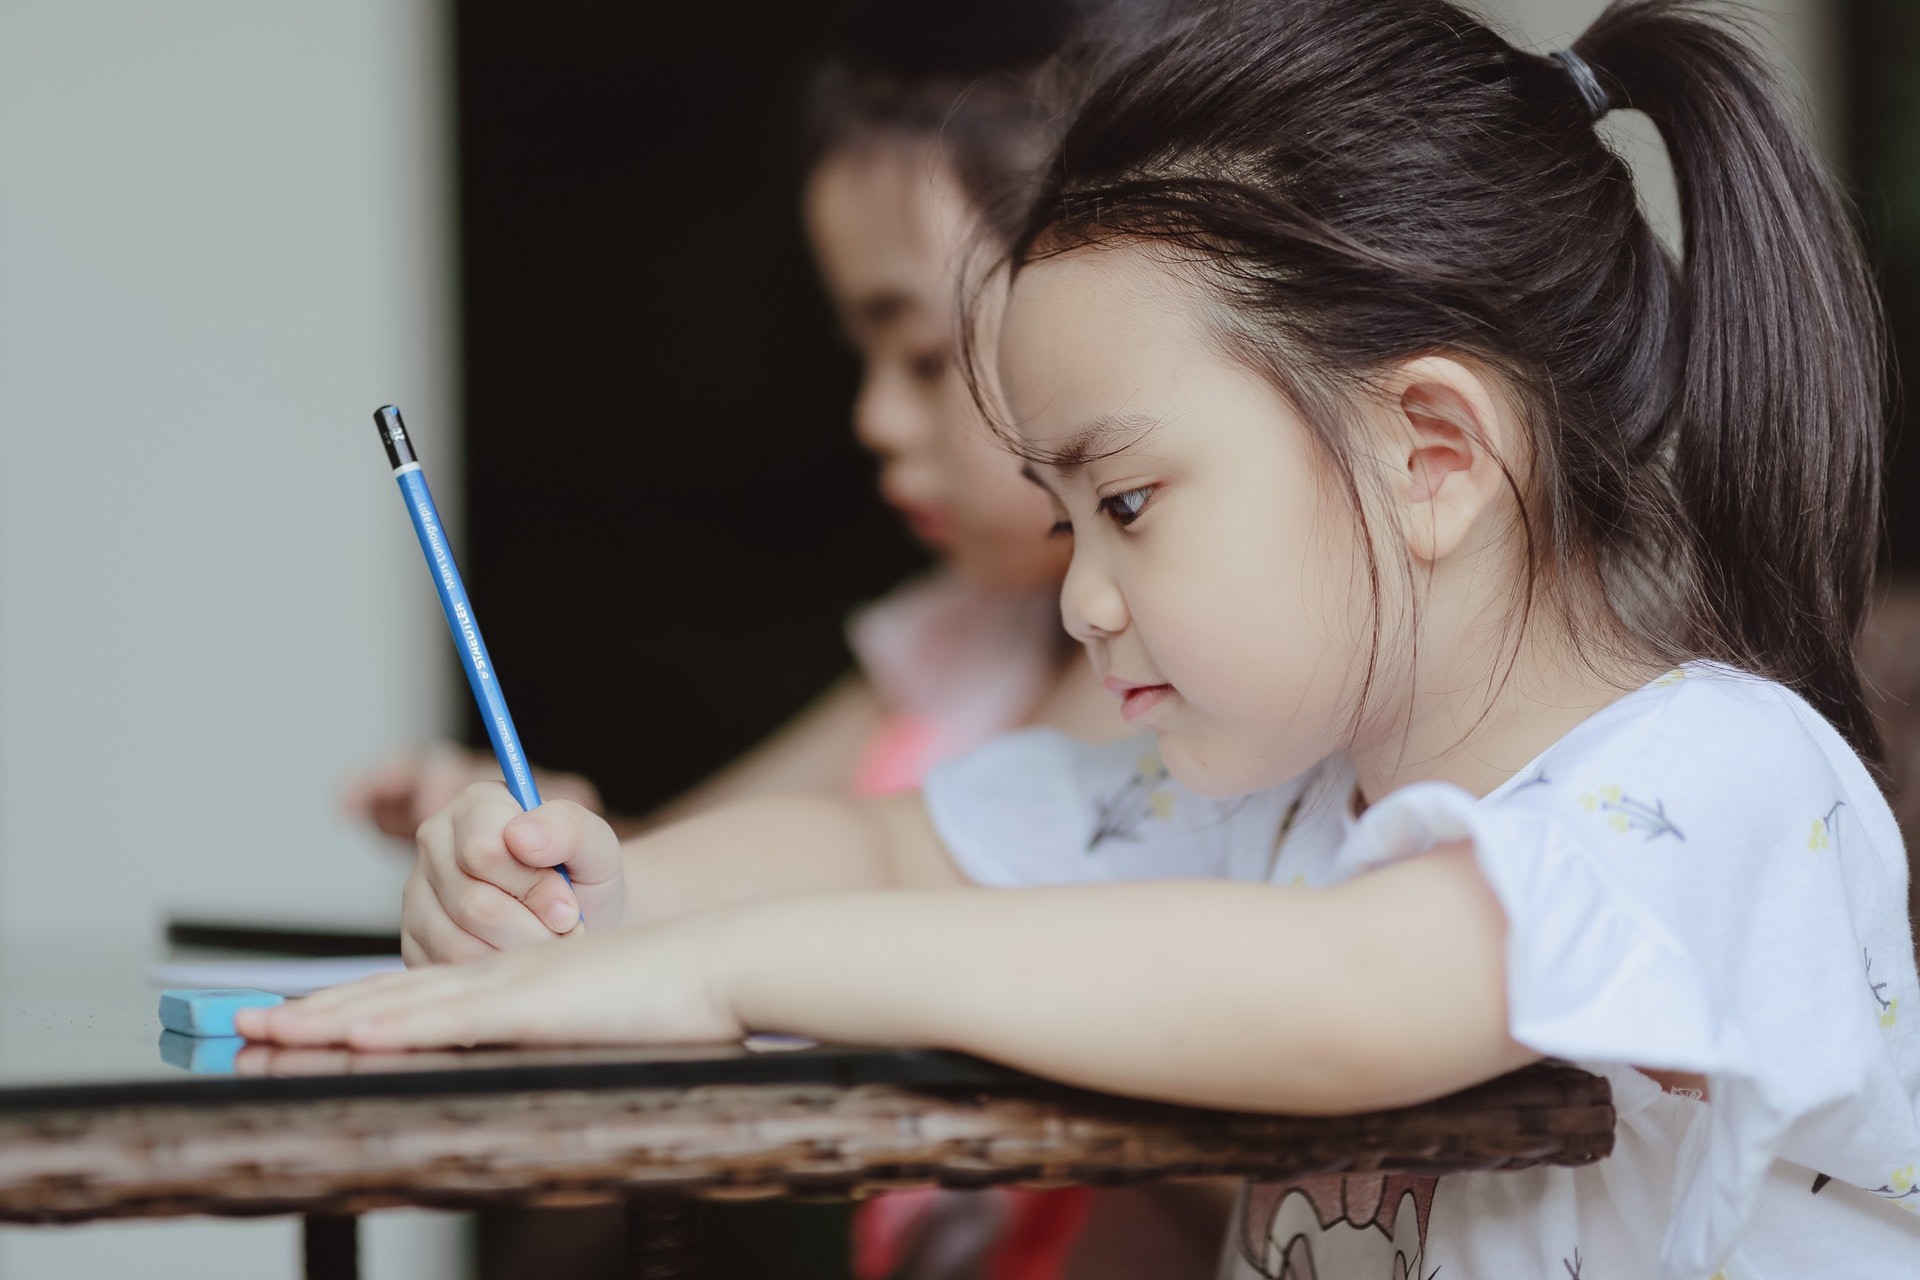 Young girl writes using a paper and pencil during educational activities.